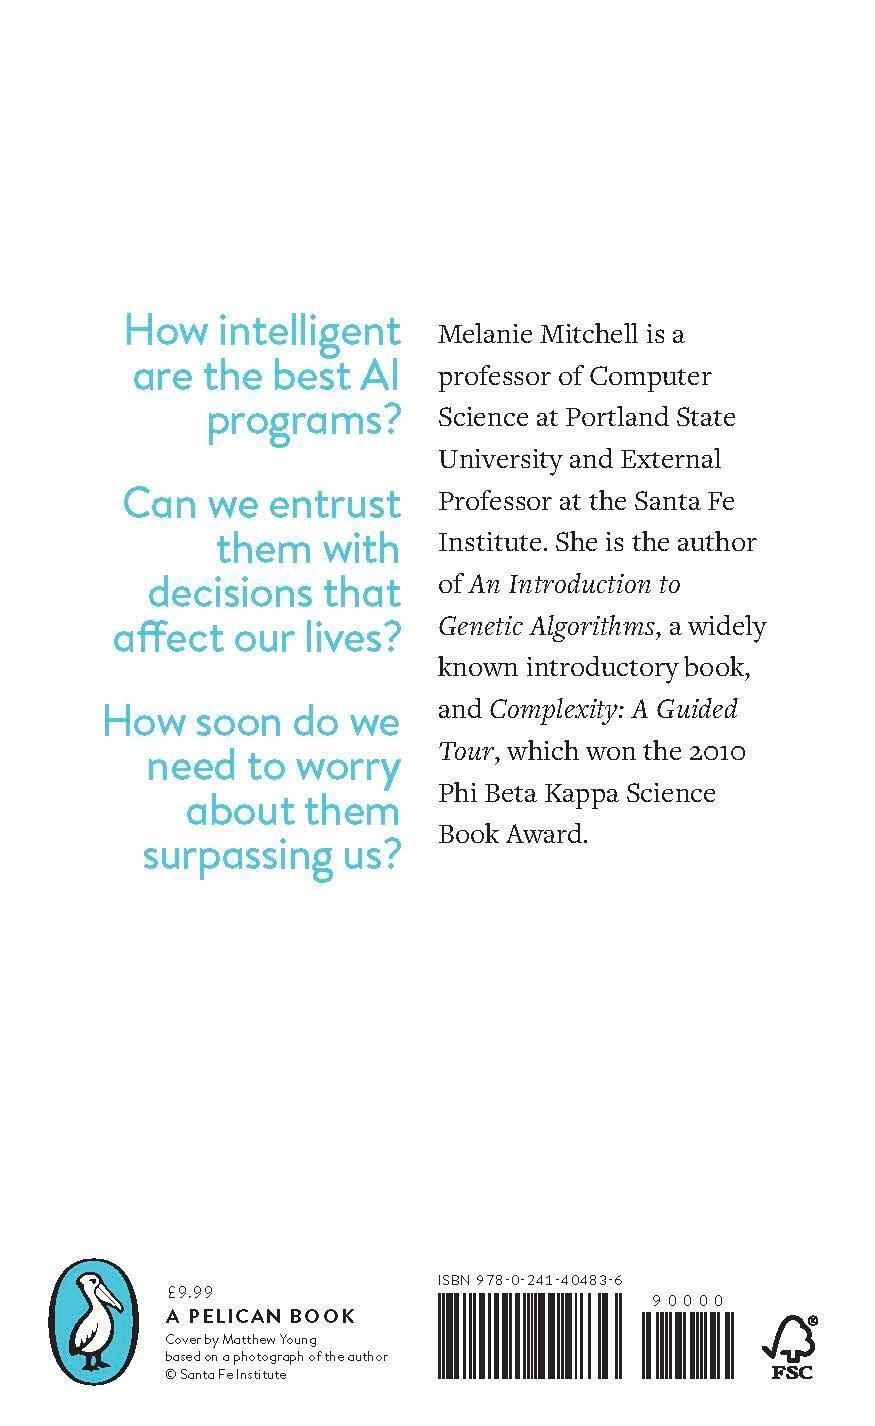 Rückseite: 9780241404836 | Artificial Intelligence | A Guide for Thinking Humans | Mitchell